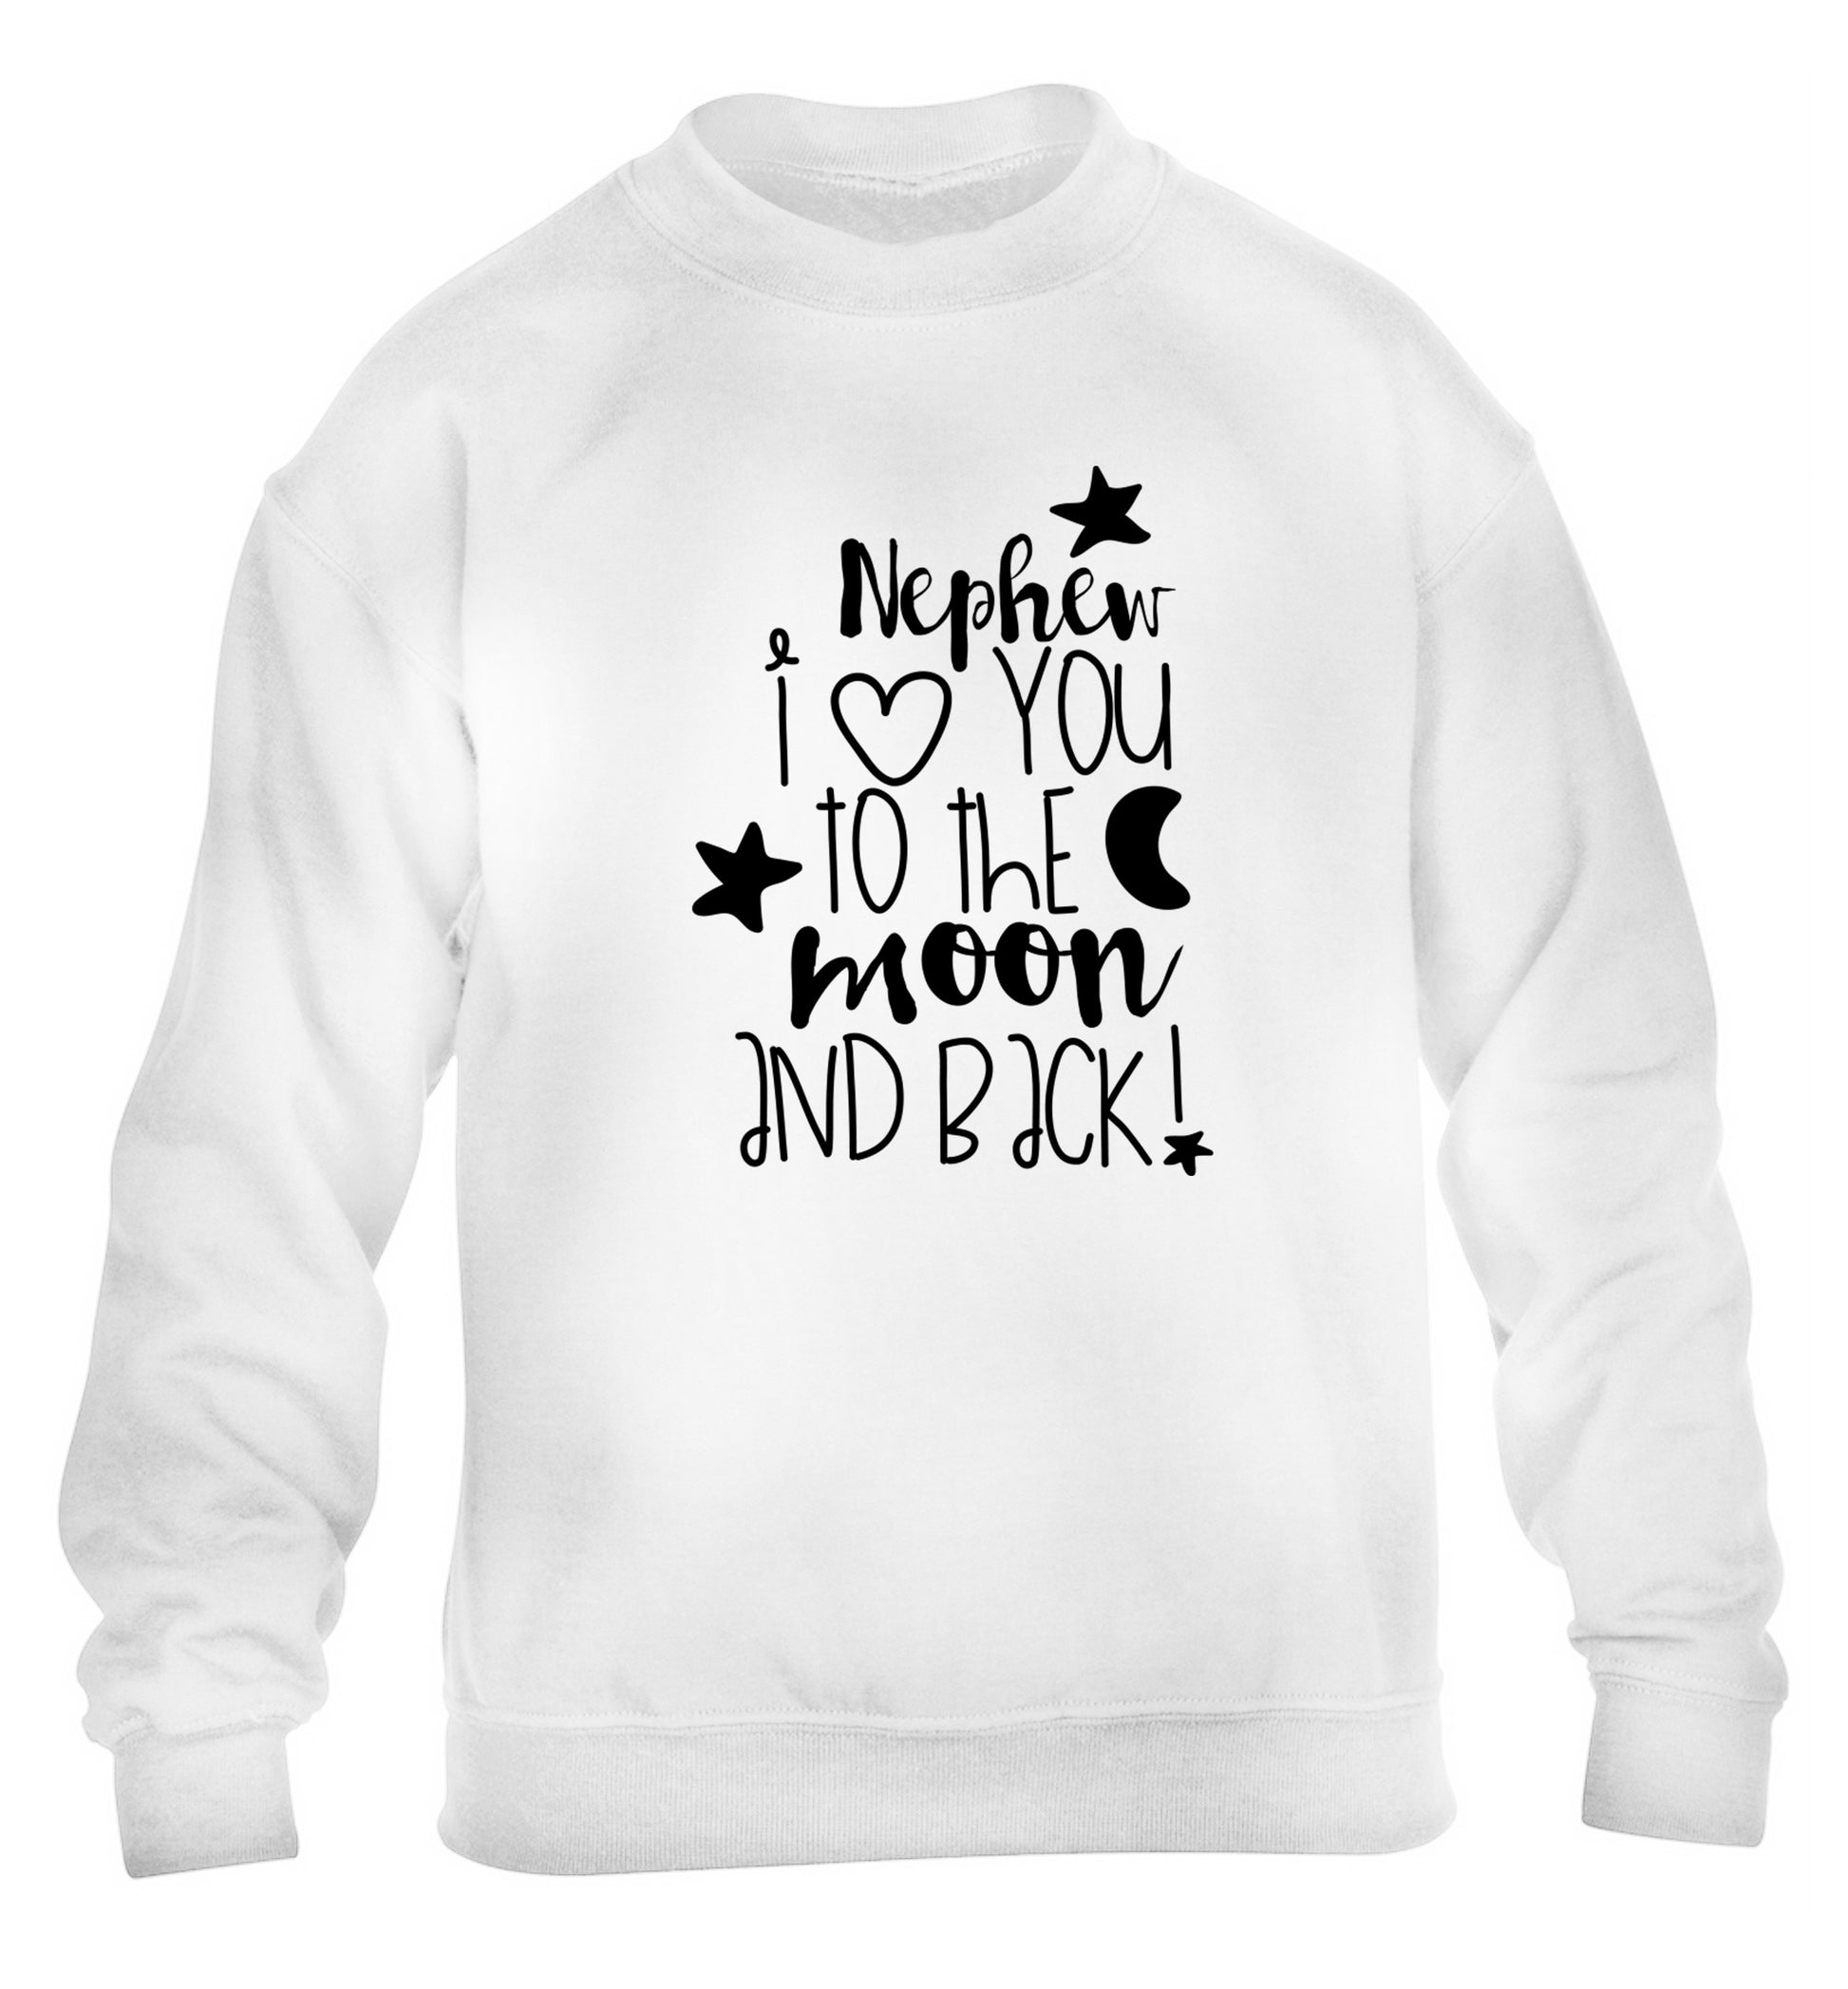 Nephew I love you to the moon and back children's white  sweater 12-14 Years